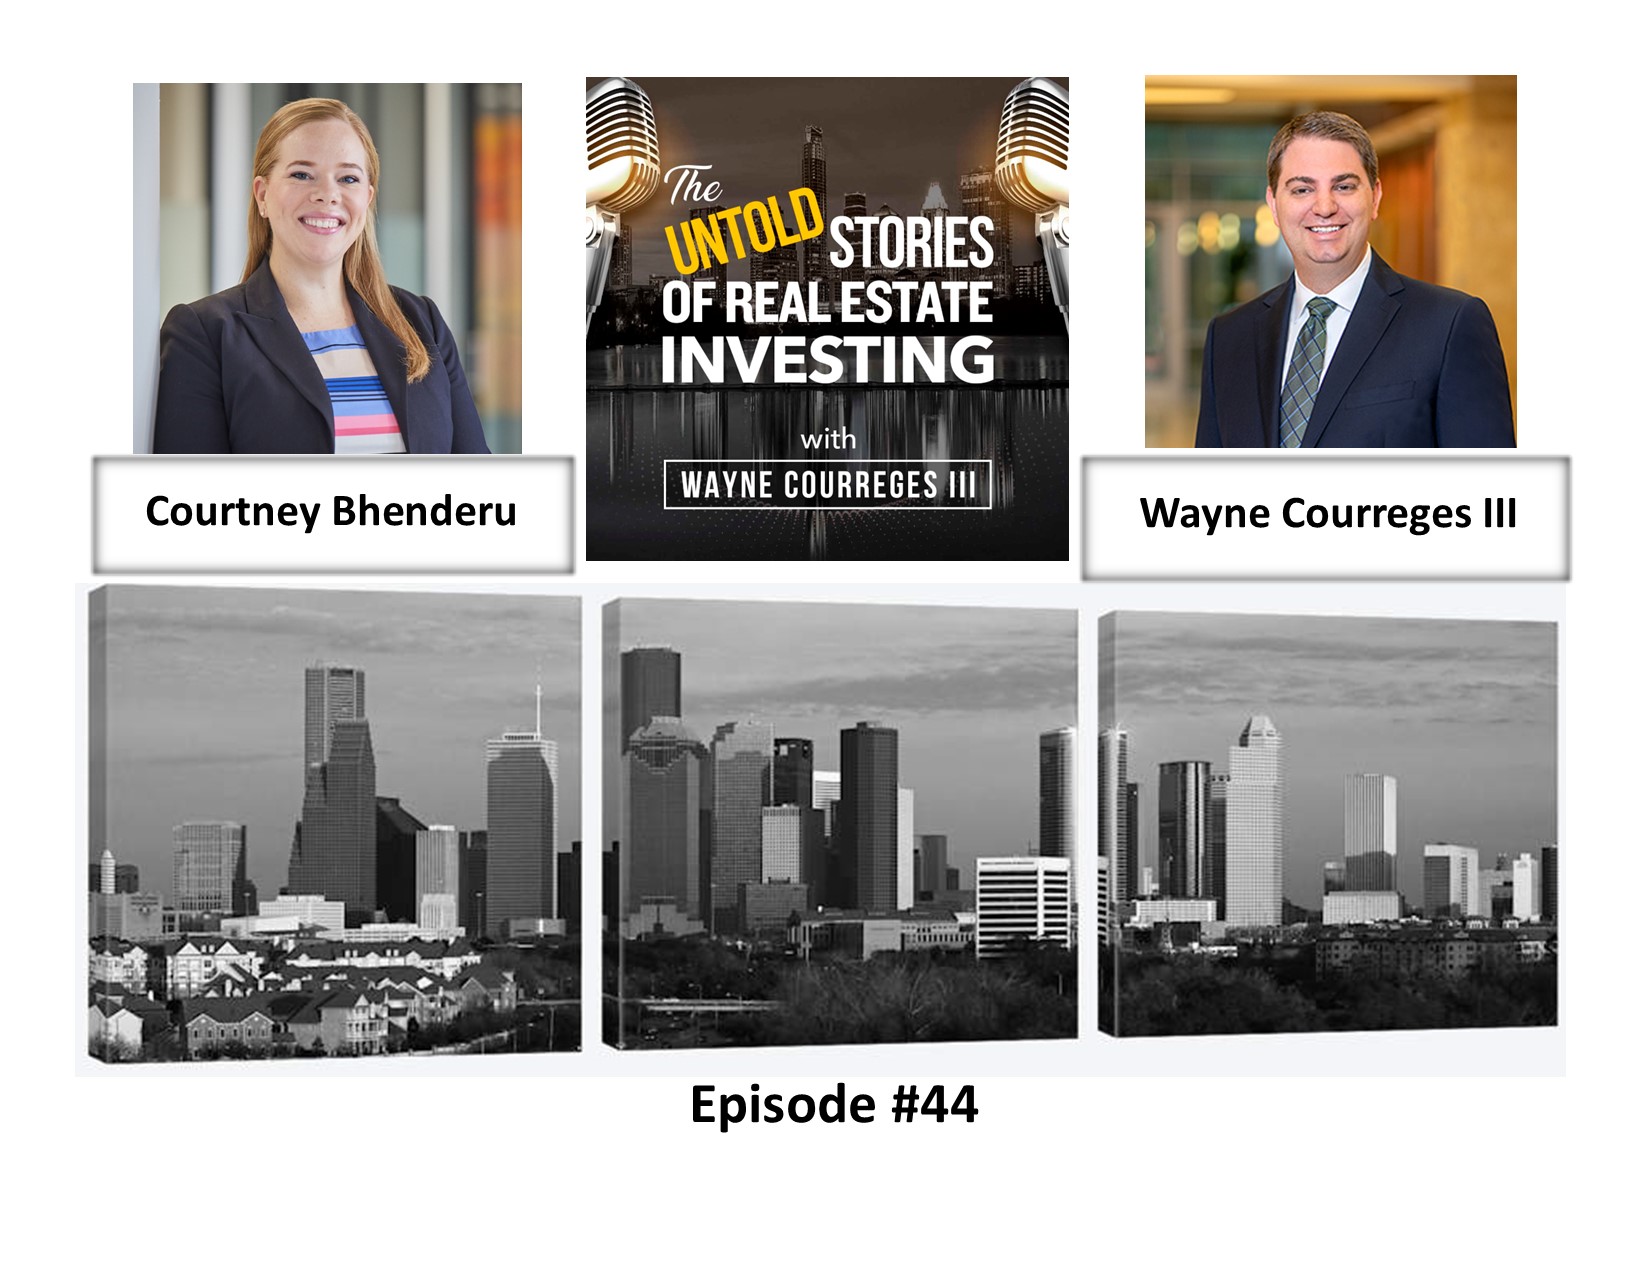 Episode #44 of The Untold Stories of Real Estate Investing with Courtney Bhenderu